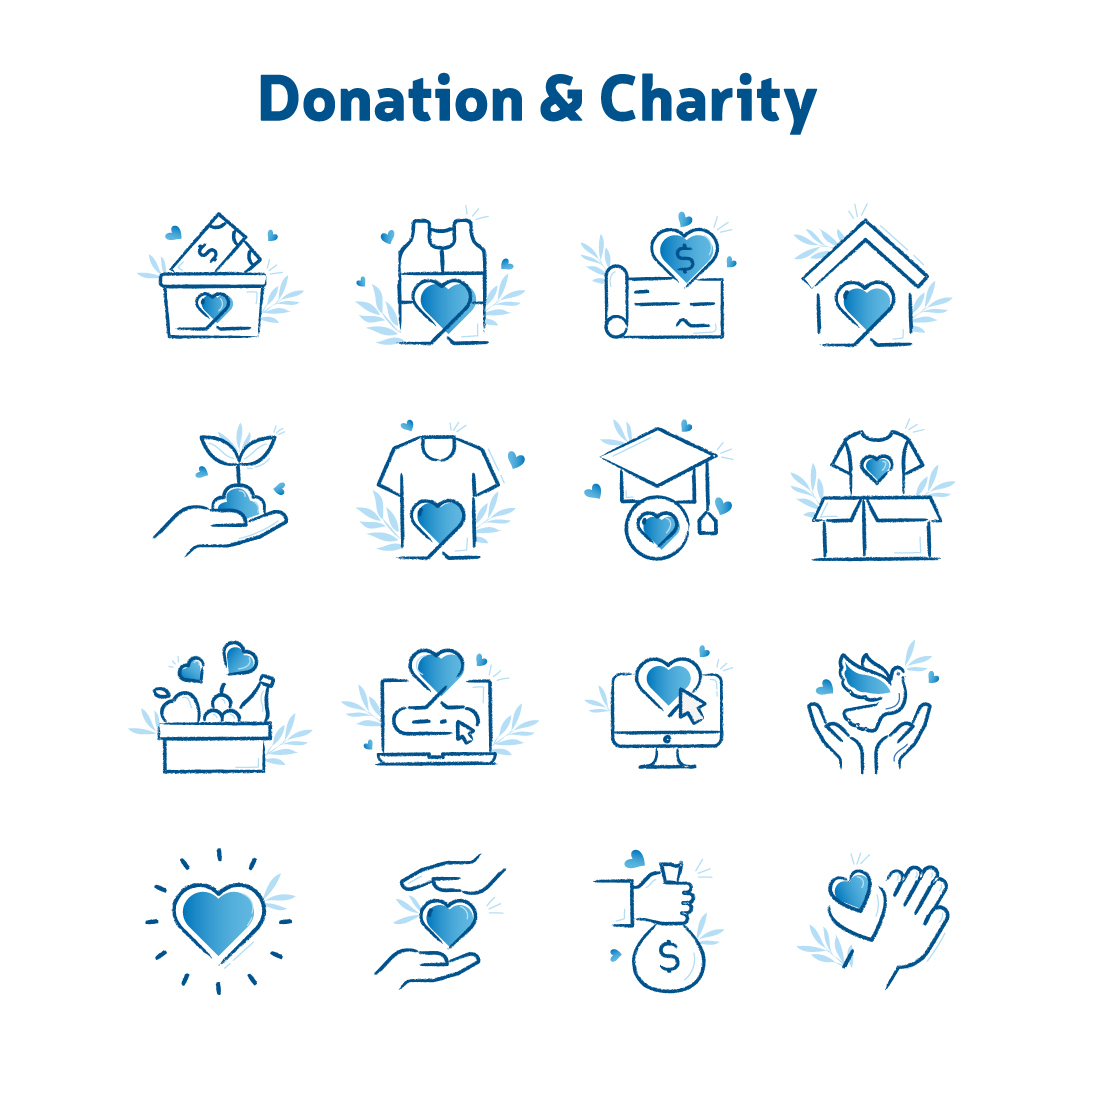 Charity and Donations: Vector Illustration Bundle for Giving, Philanthropy, and Non-Profit Organizations cover image.